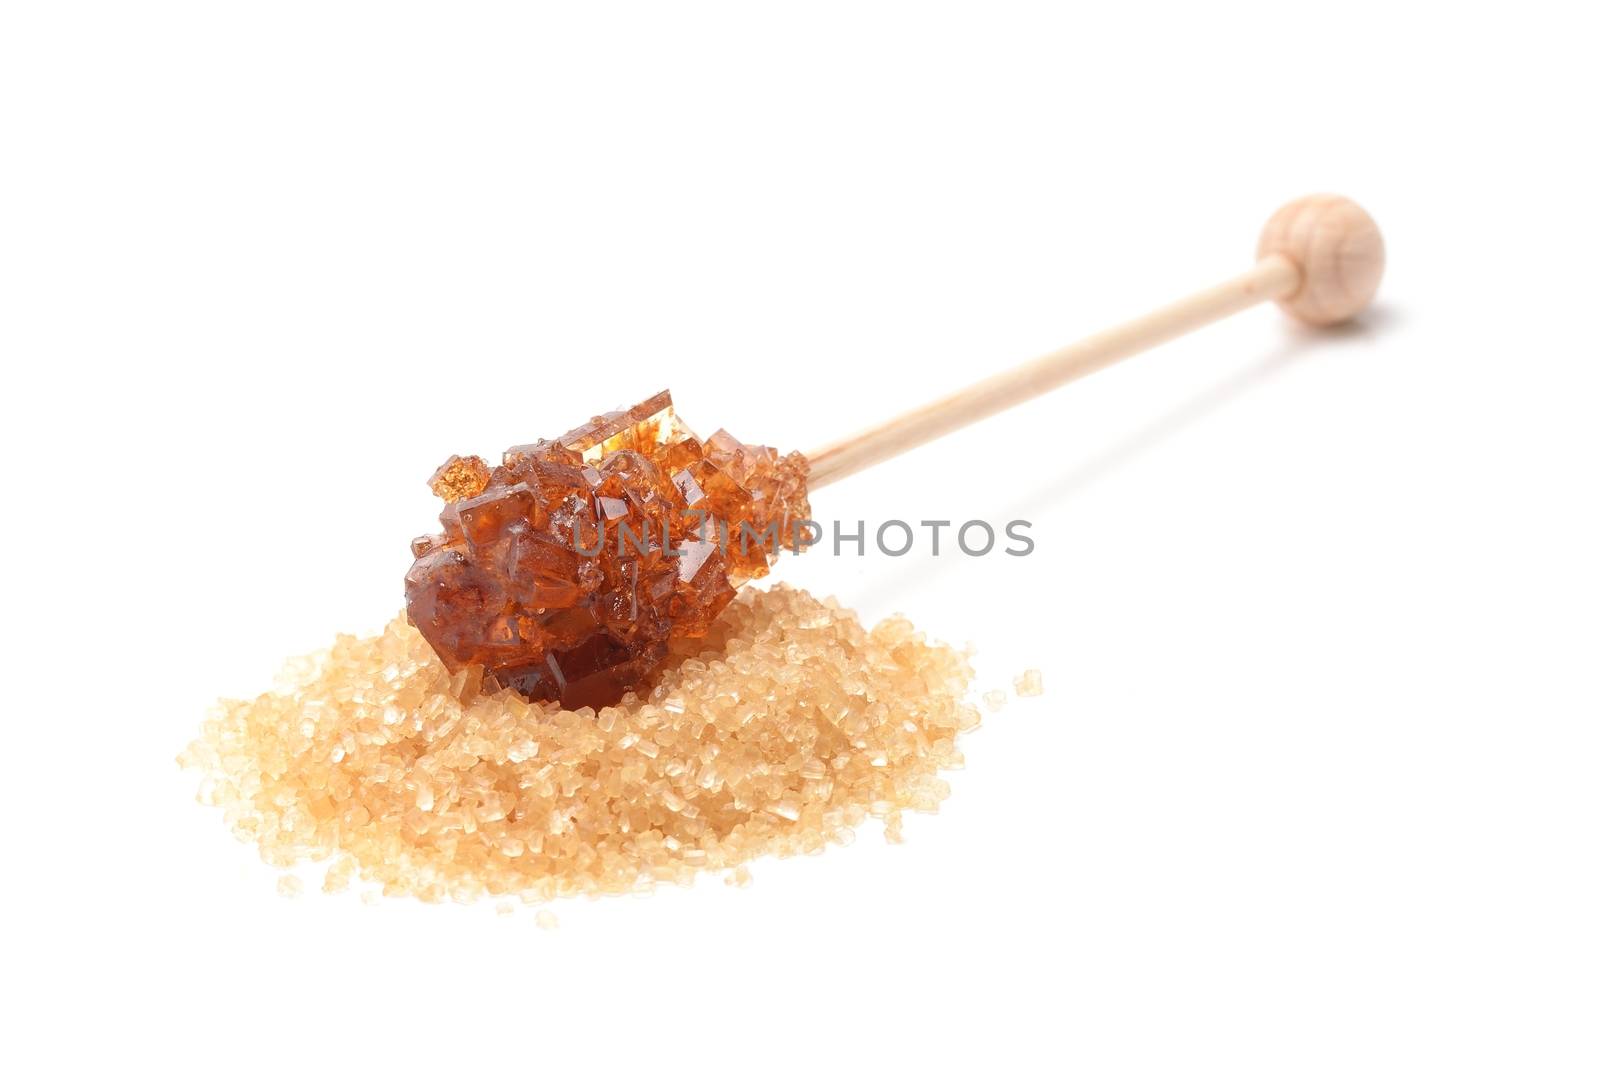 Brown sugar crystal on wooden stick isolated over white background by comet